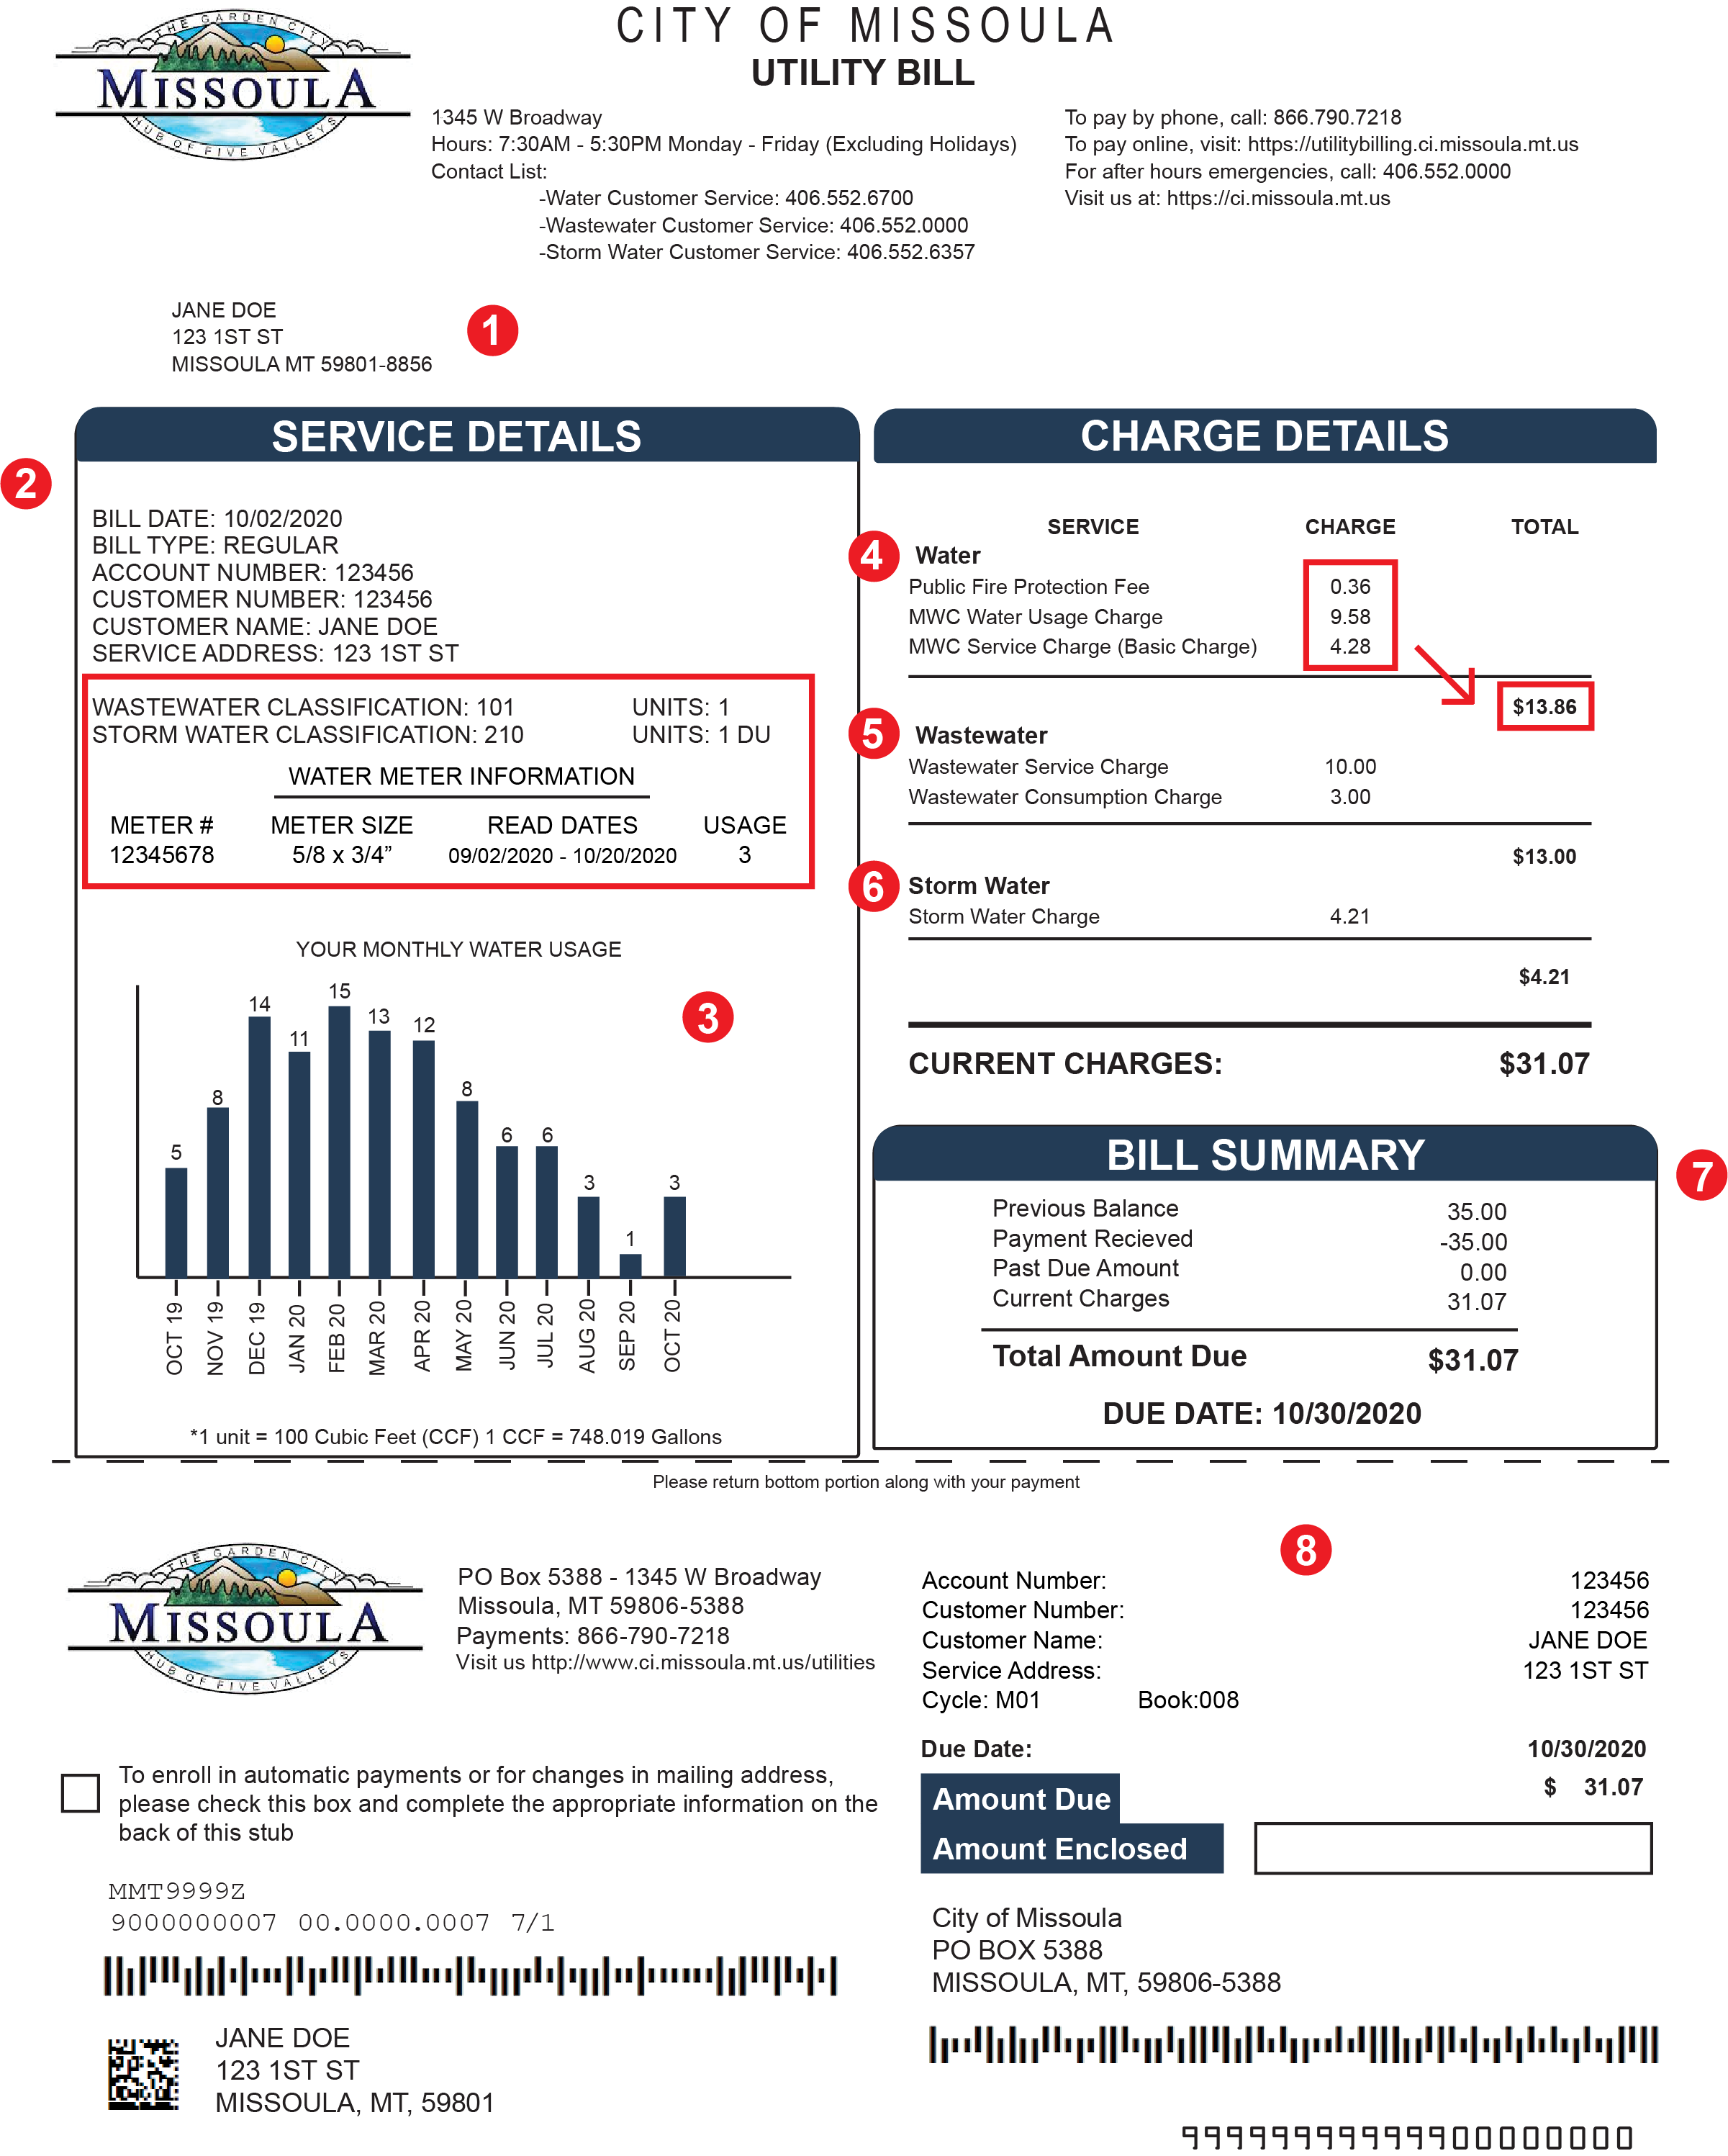 Utility Bill image marked with list numbers